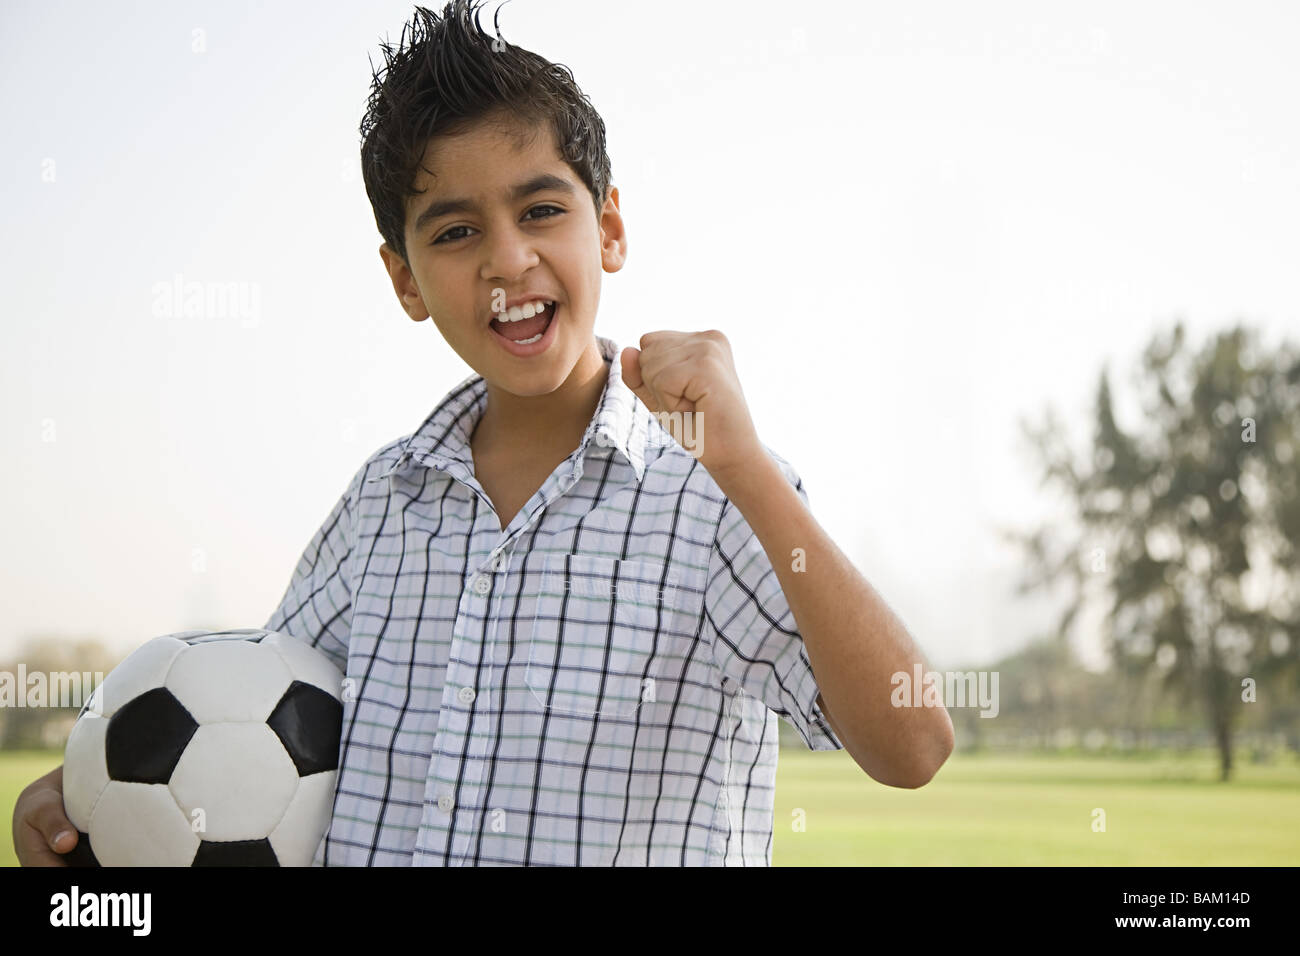 Portrait of a boy holding a football Stock Photo